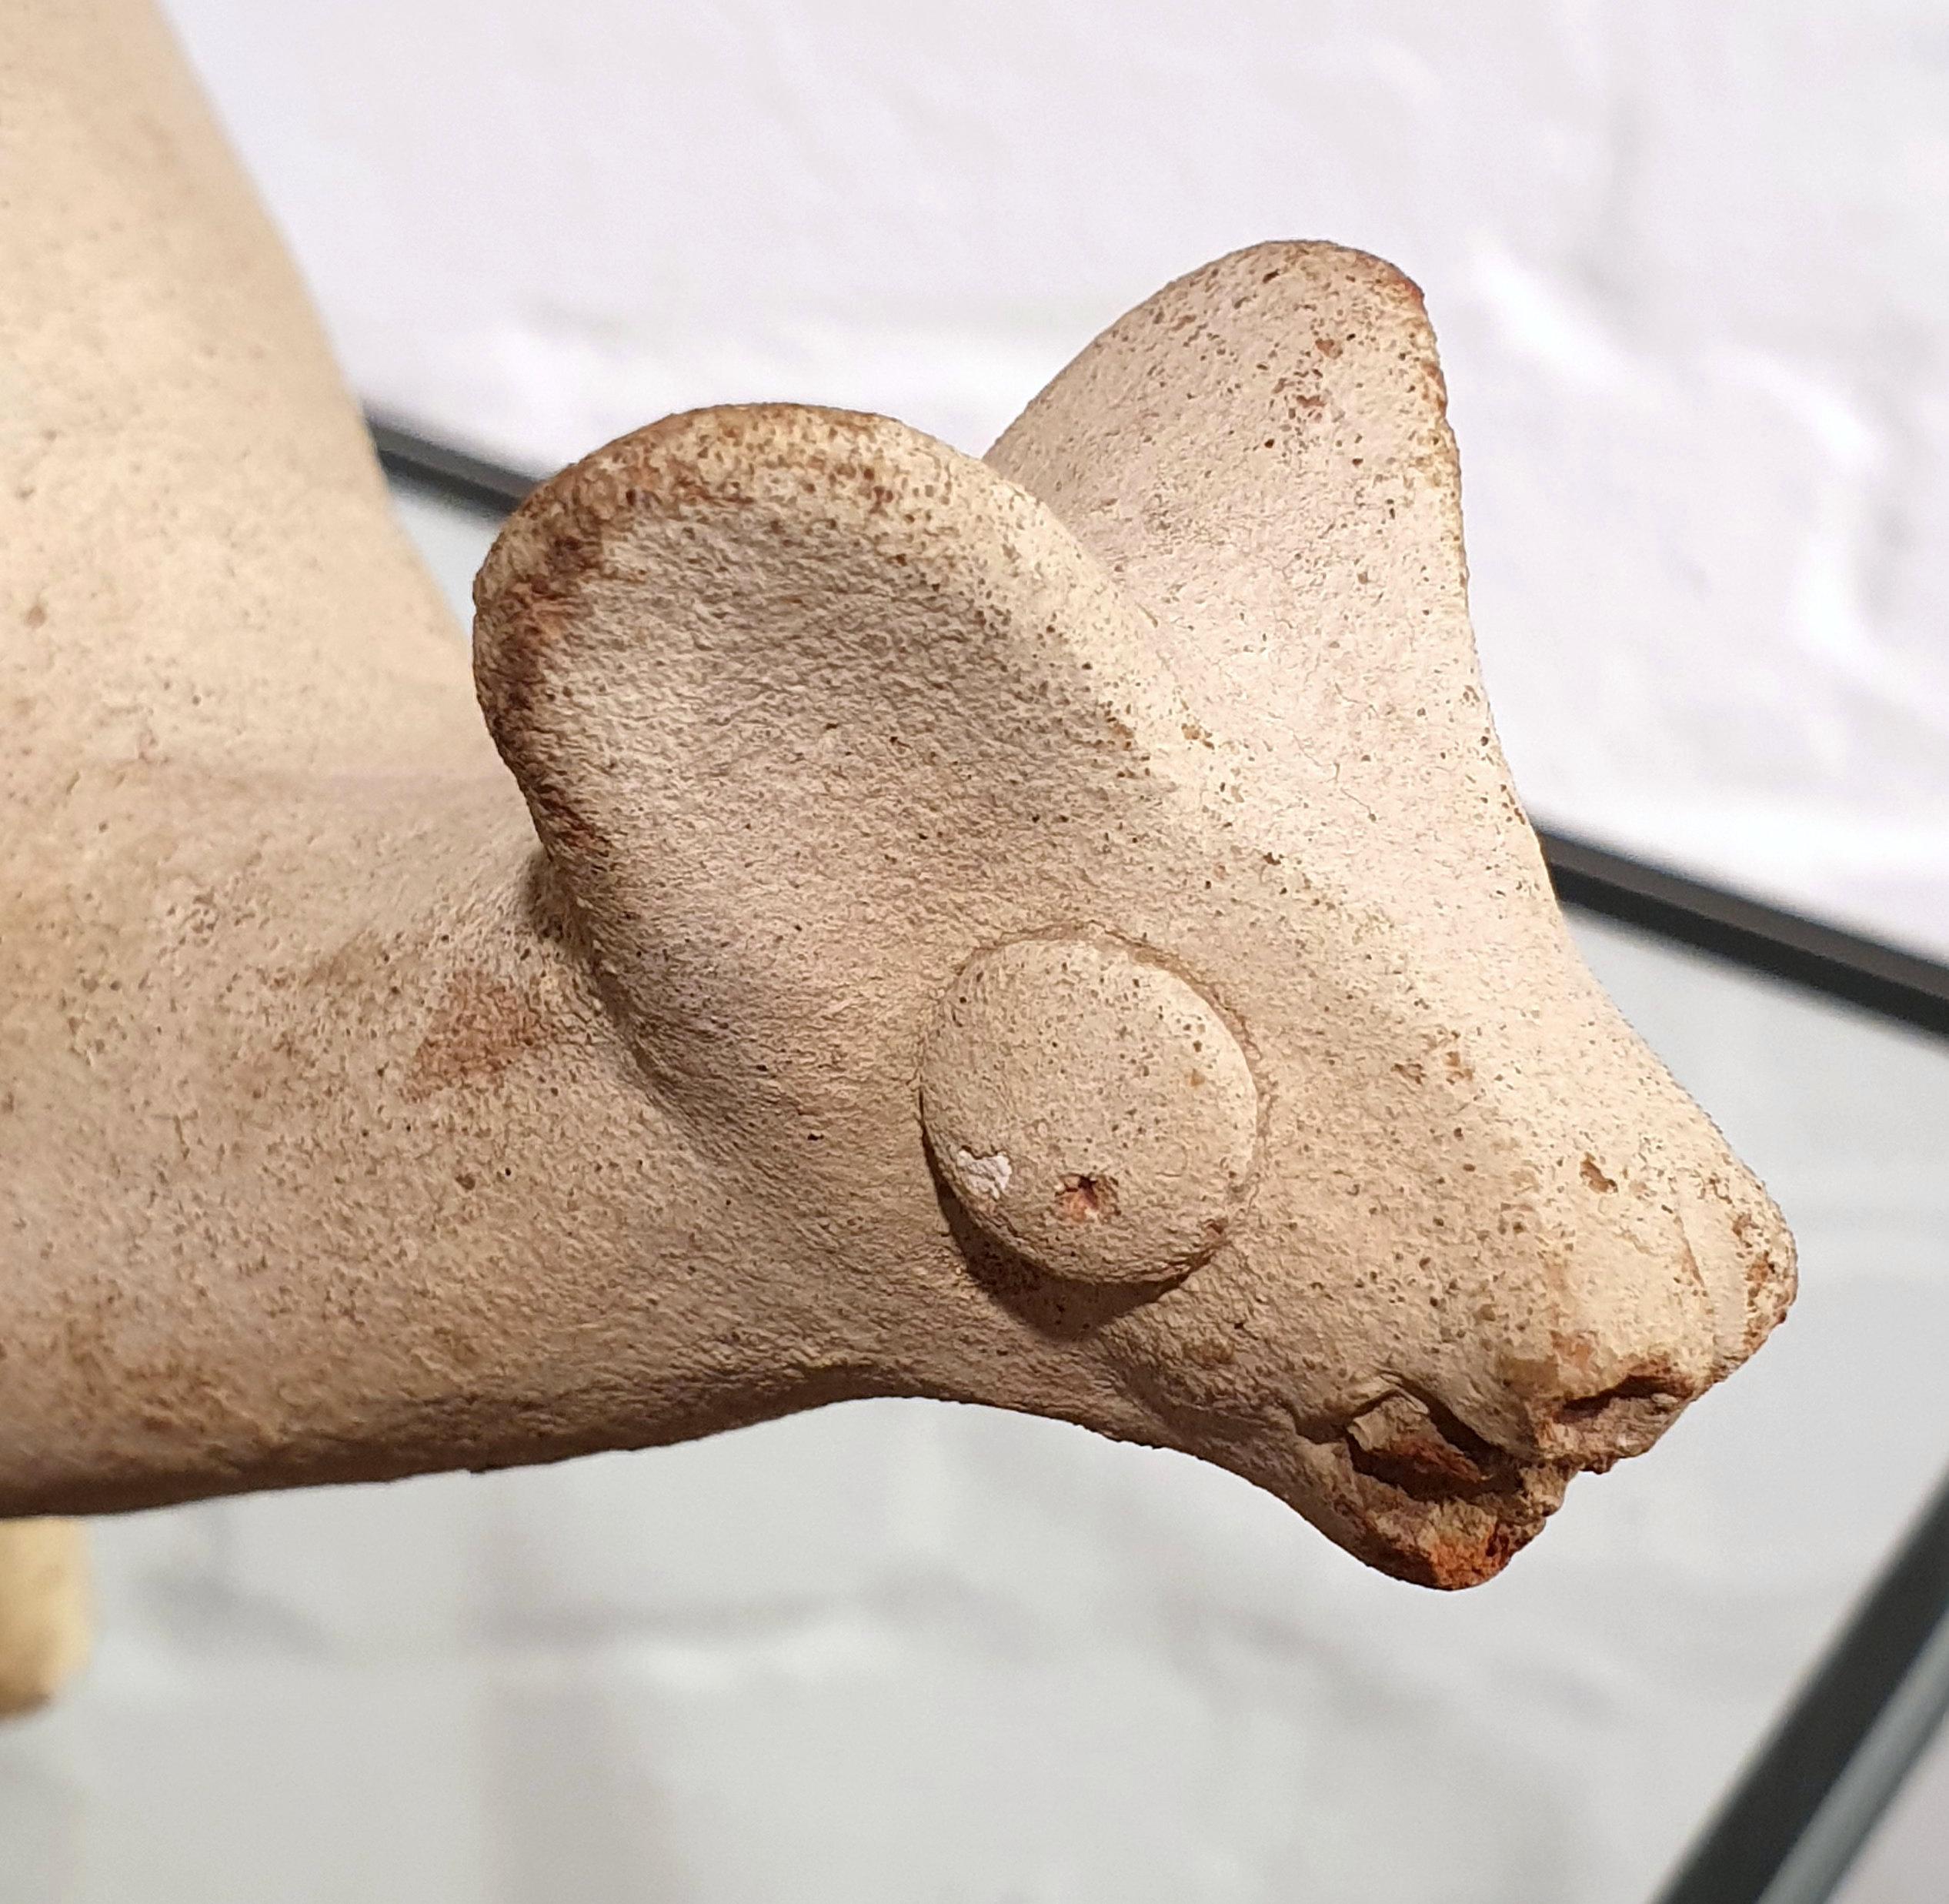 This zoomorphic vessel in the shape of a llama with an elongated
globular body is from the Chancay civilisation, dated between 1000 and 1400 AD.
The Chancay were a pre-Columbian archaeological civilisation which developed between the valleys of